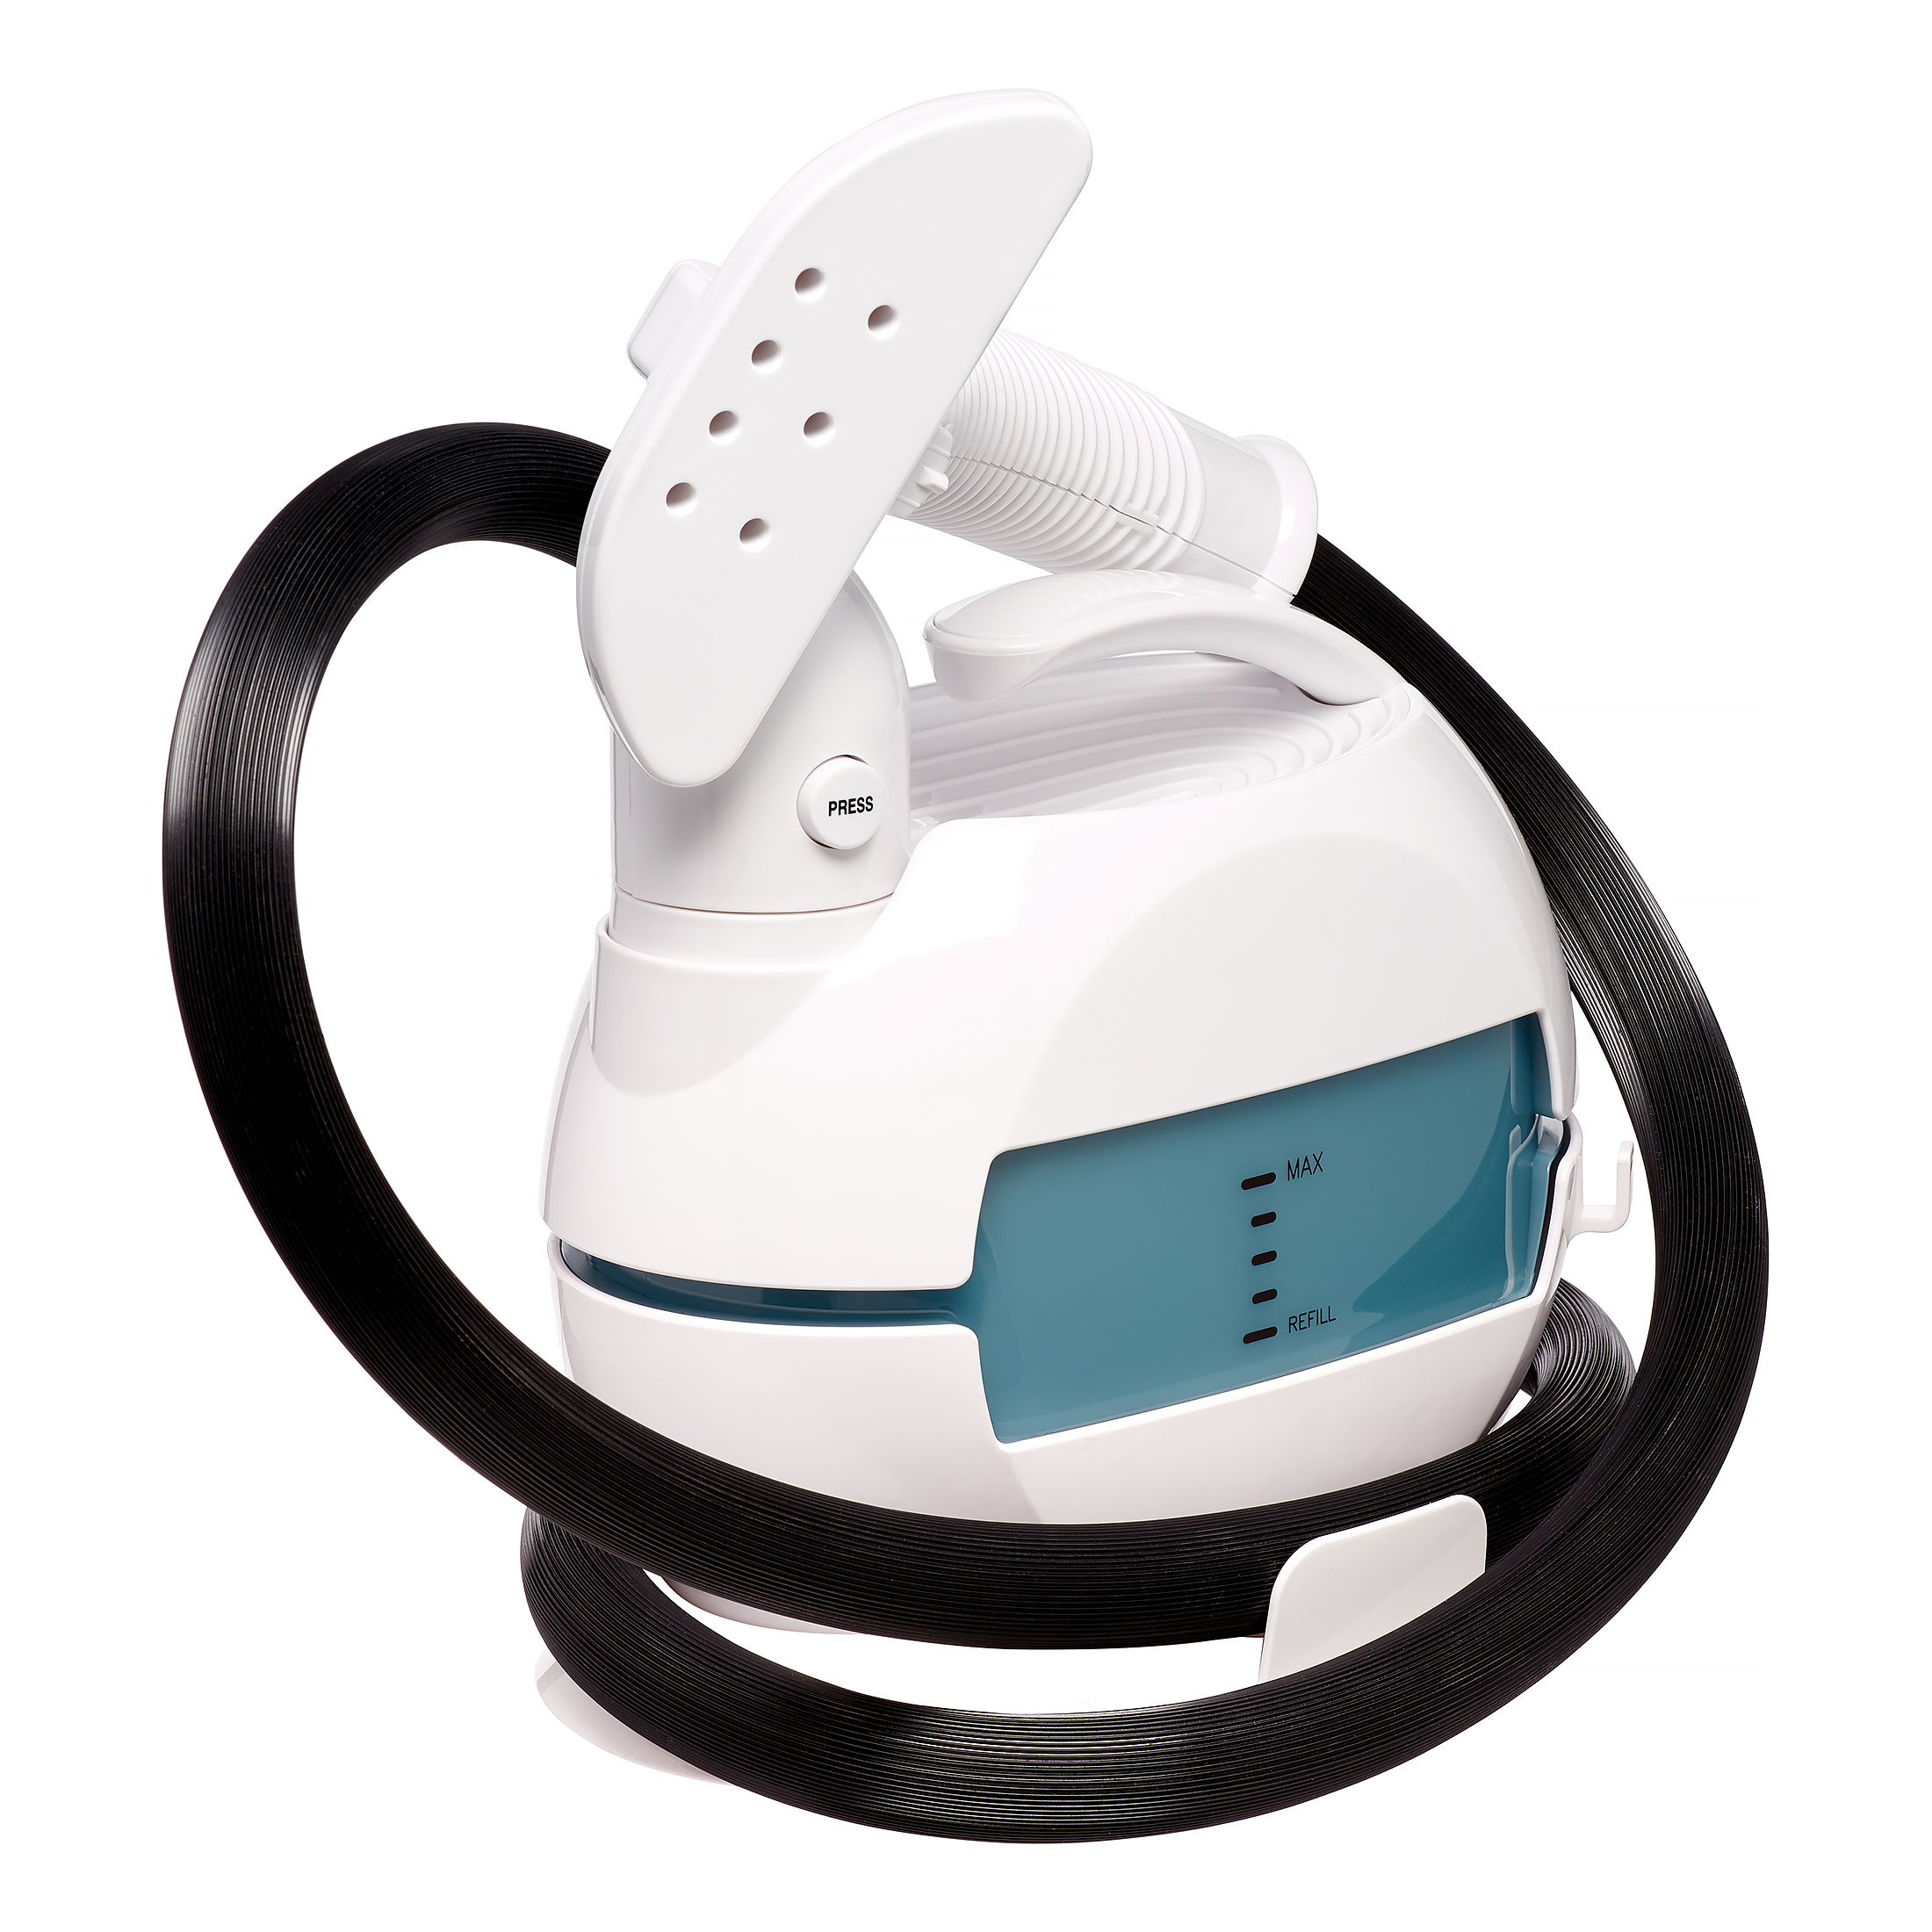 Conair 1200 Watt Commercial Quality Compact Fabric Steamer, Model GS61R....Kills 99.9% of Germs and Bacteria - image 4 of 10